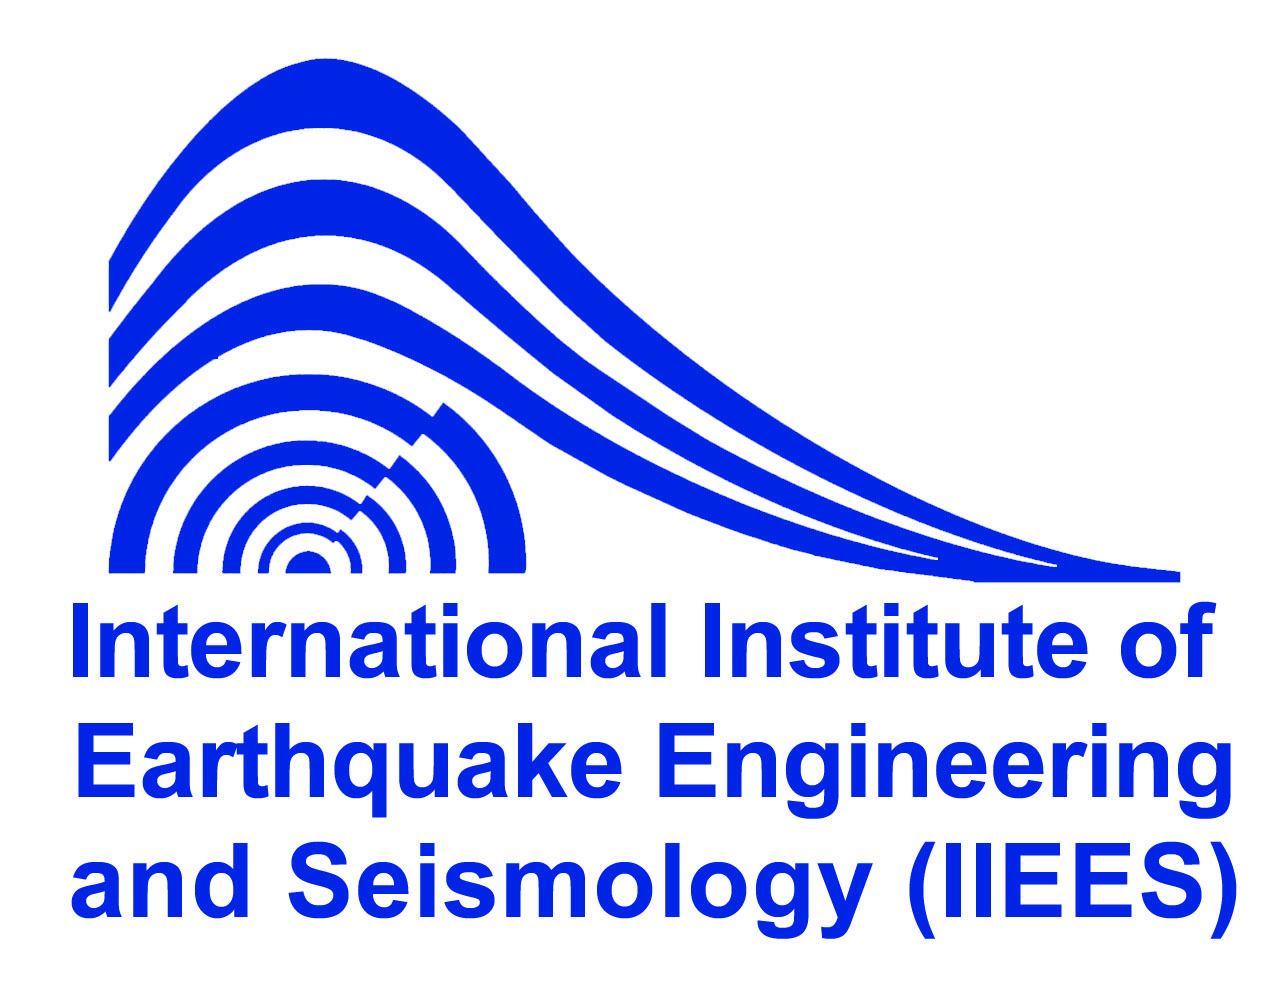 International Institute of Earthquake Engineering and Seismology (IIEES)